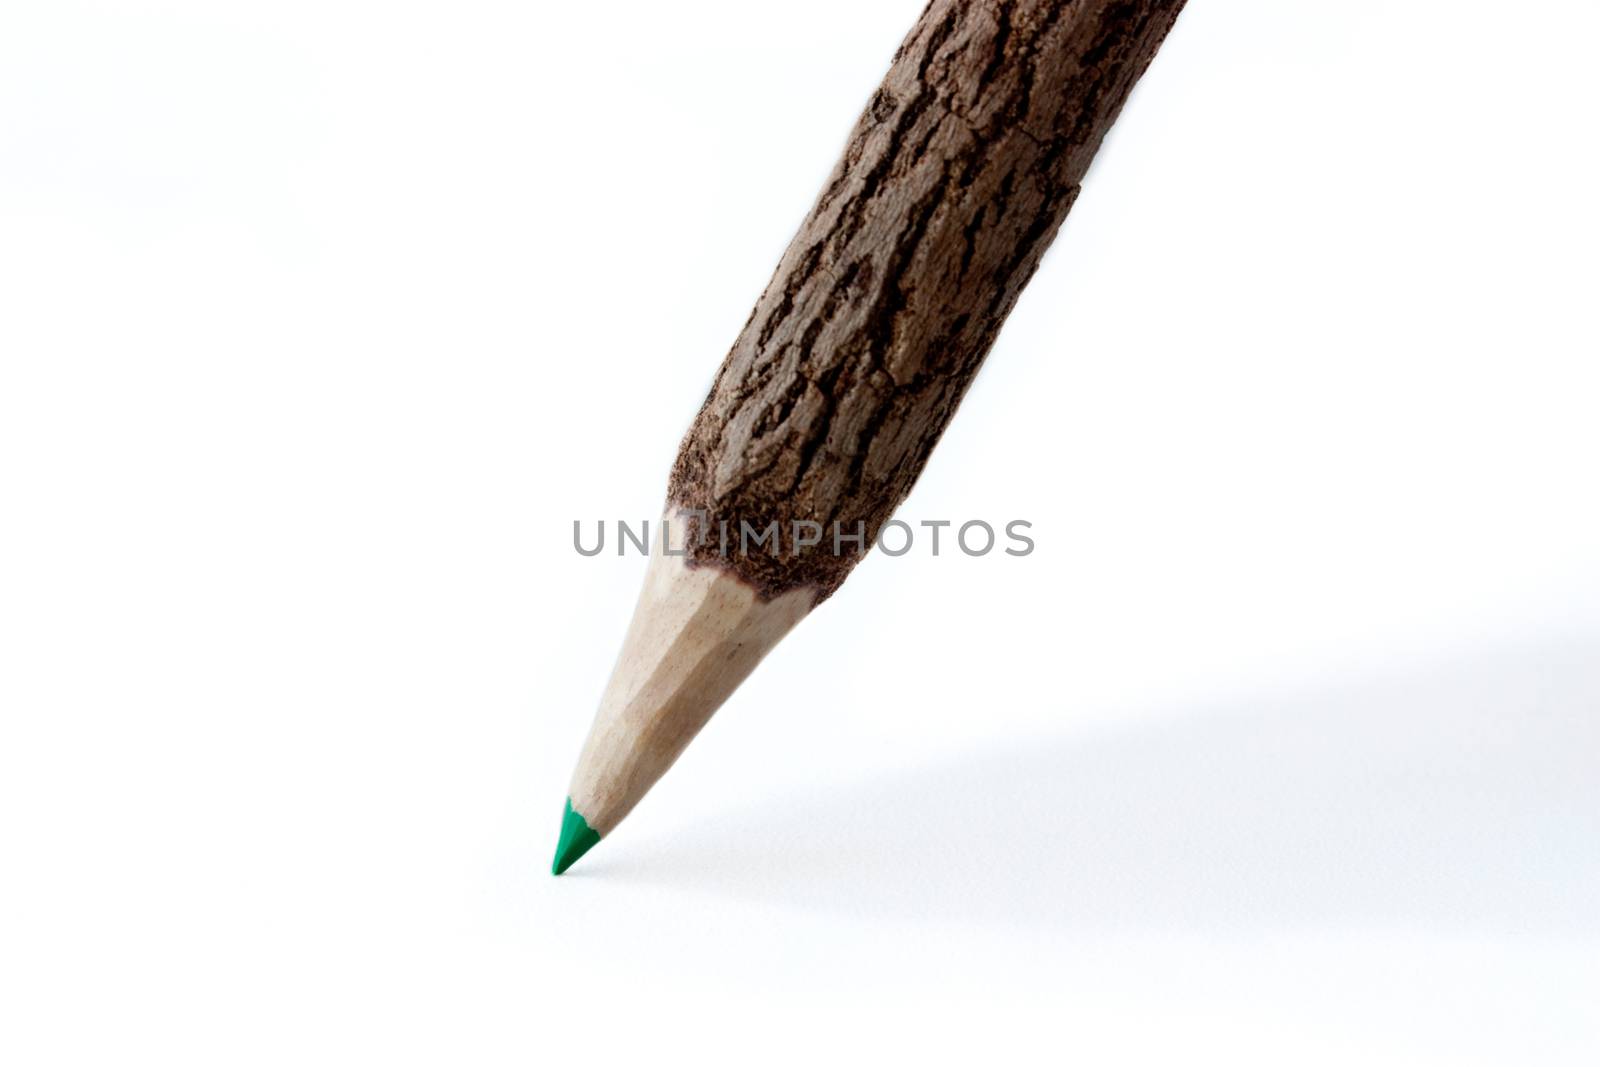 Green pencil on white background by evdayan